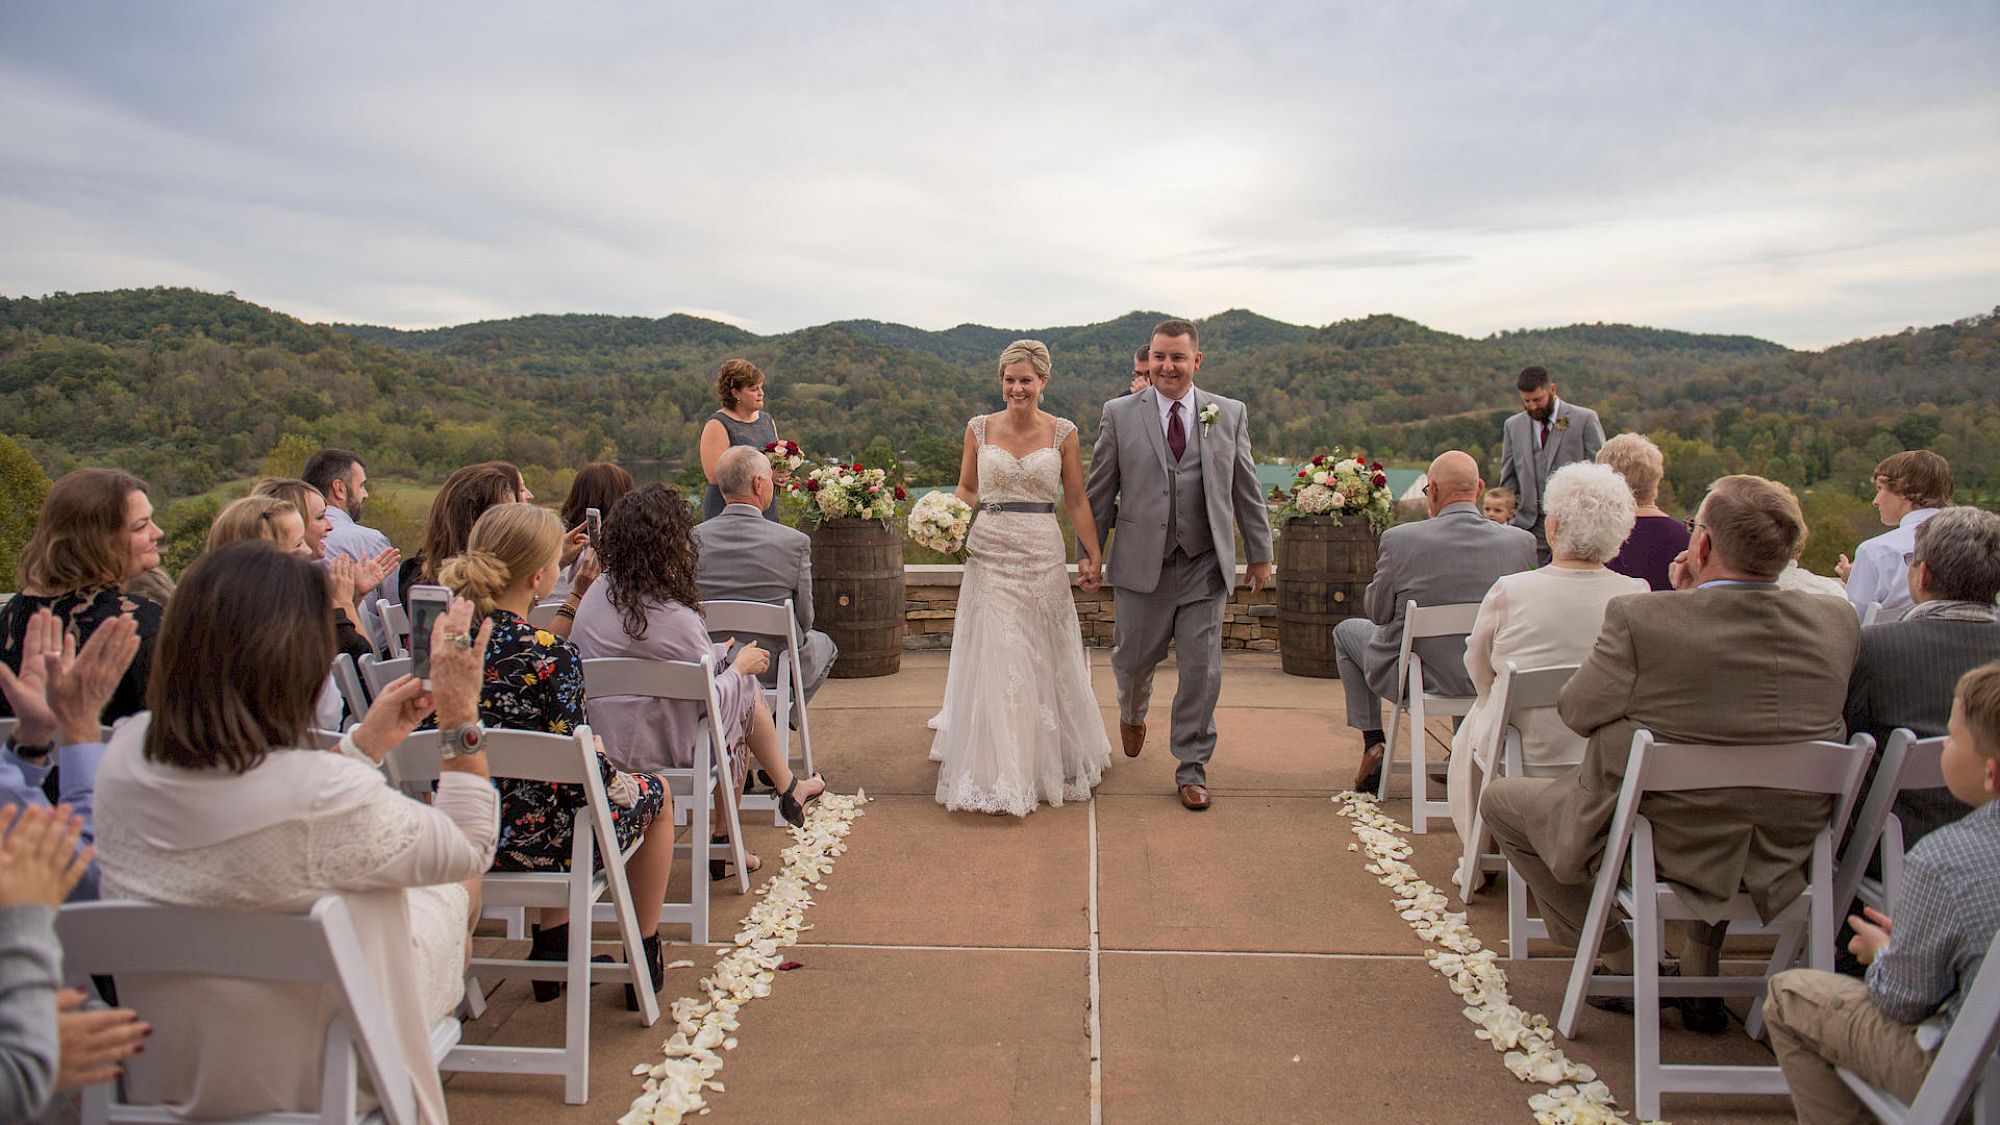 A bride and groom are walking down the aisle outdoors, surrounded by guests seated on both sides, against a scenic backdrop of hills and sky.